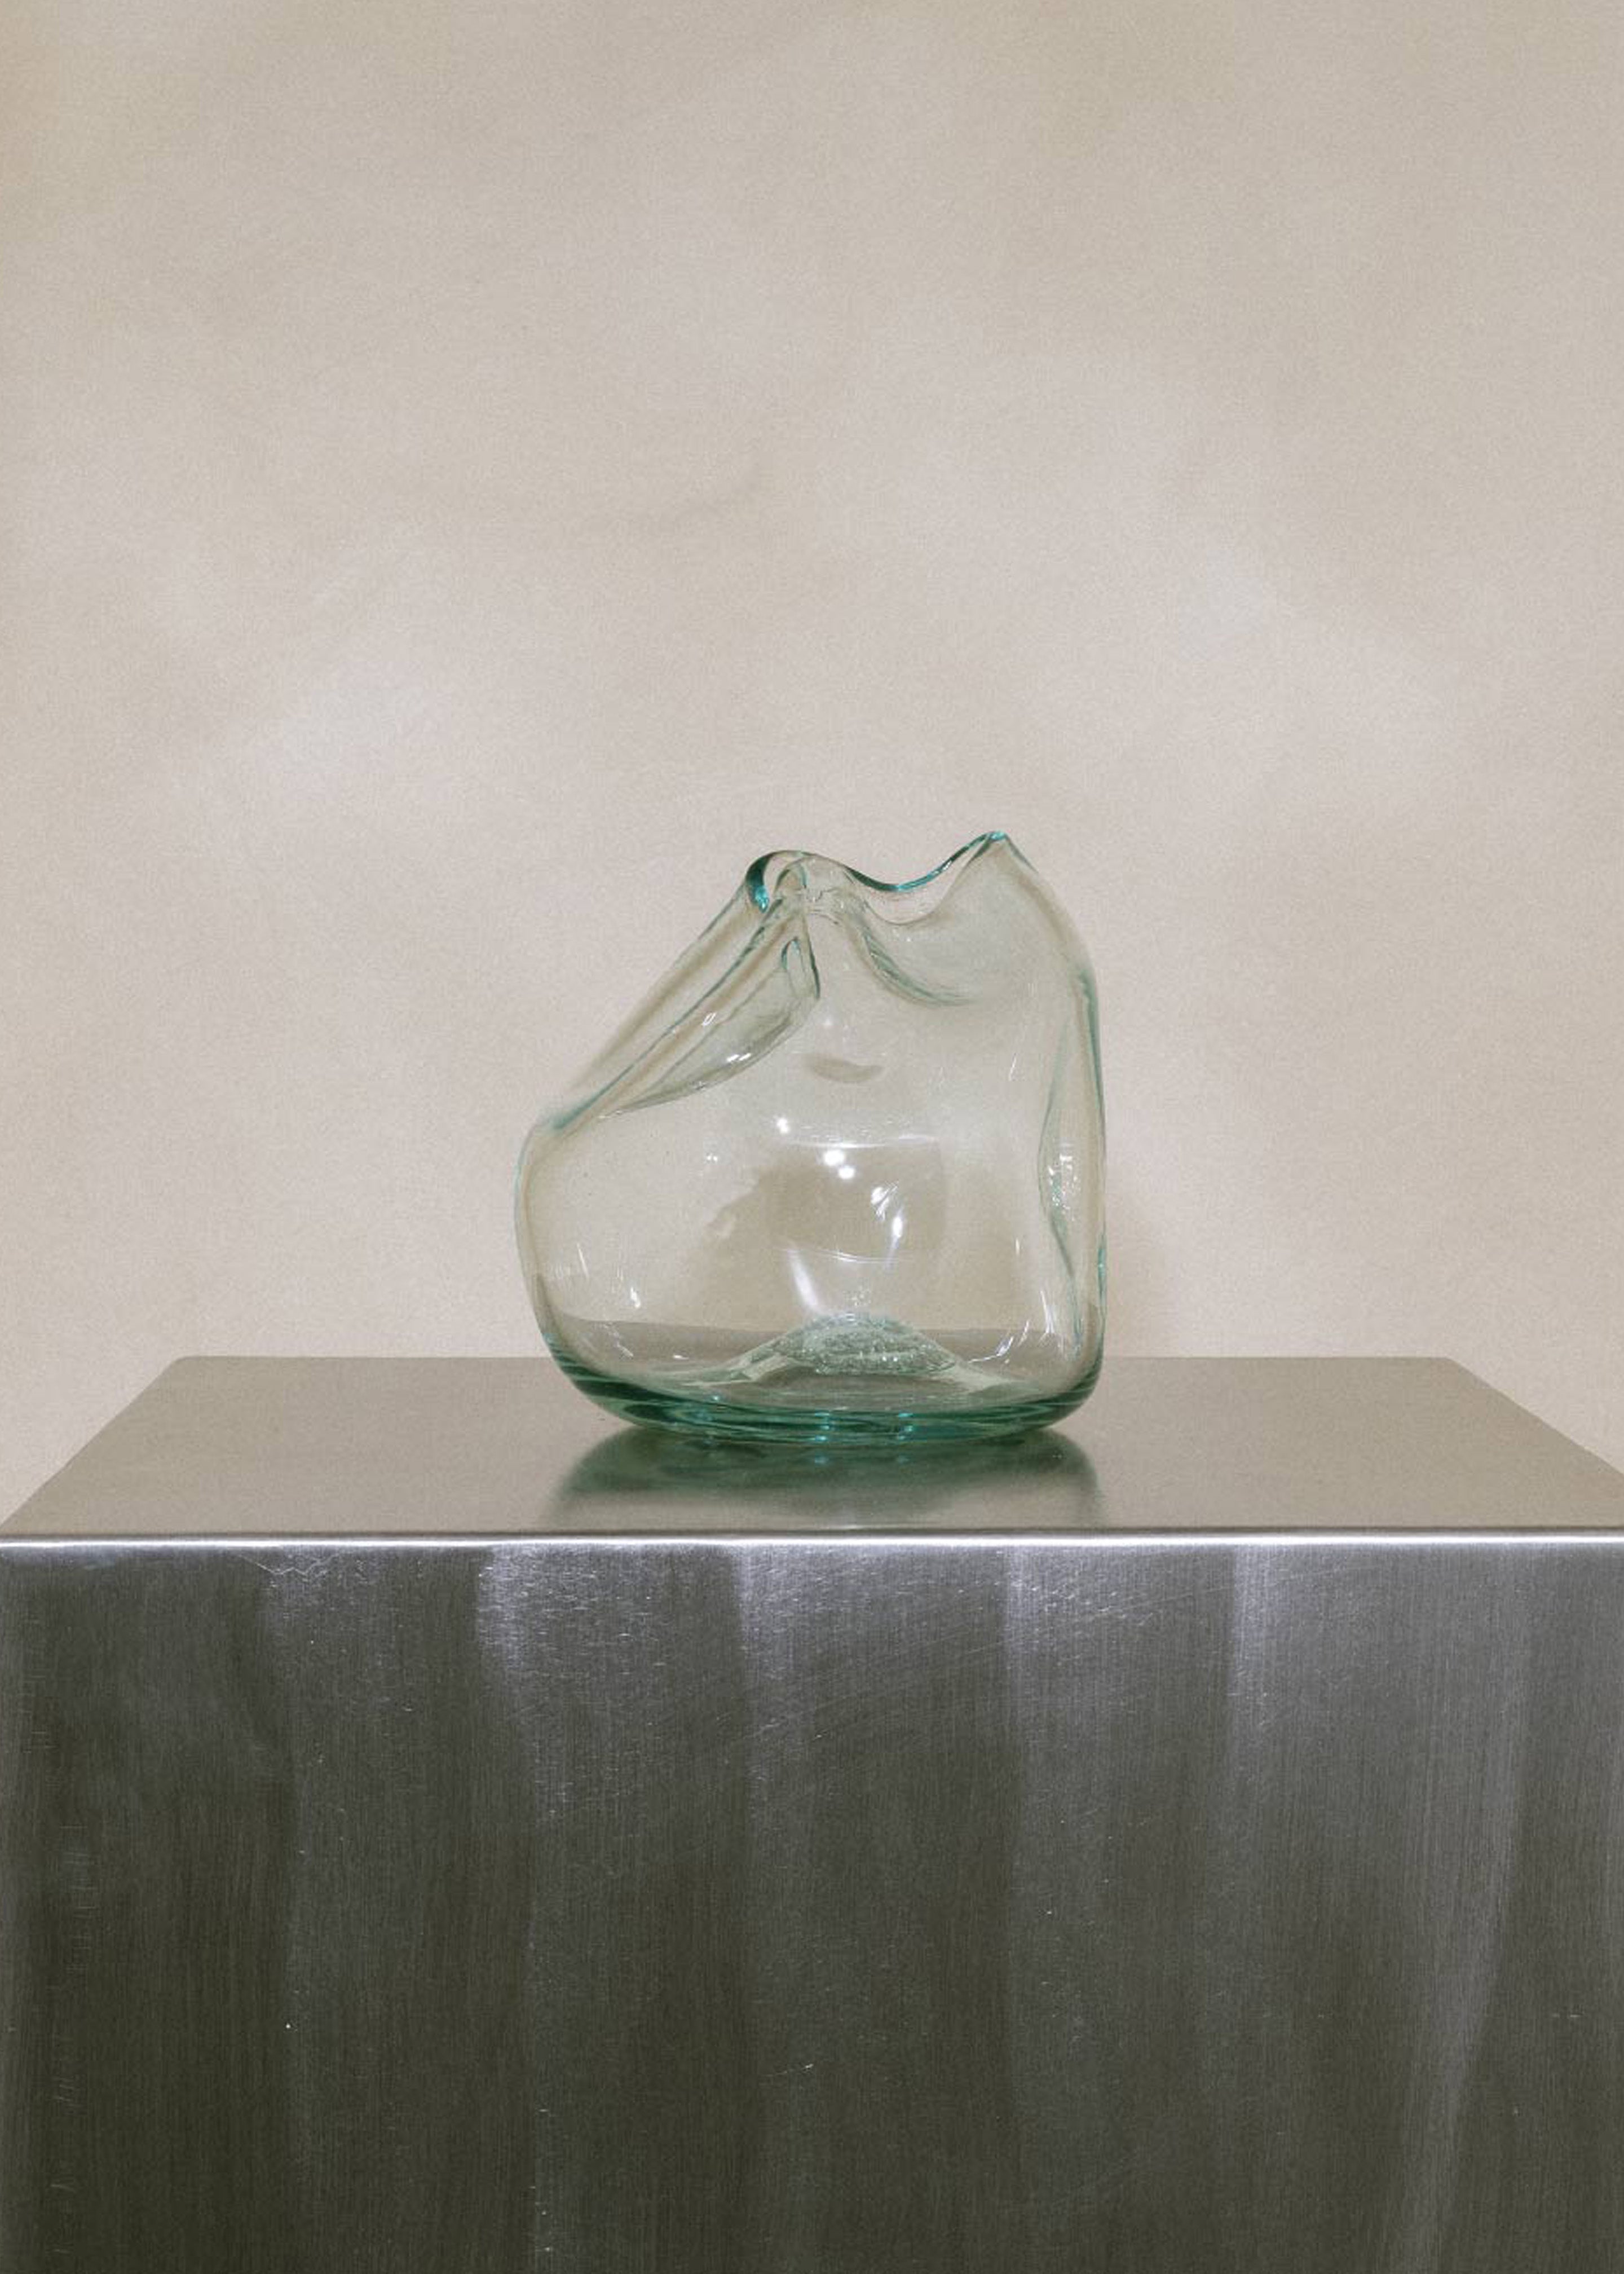 Completedworks The Bubble to End All Bubbles Vase - Clear - 2